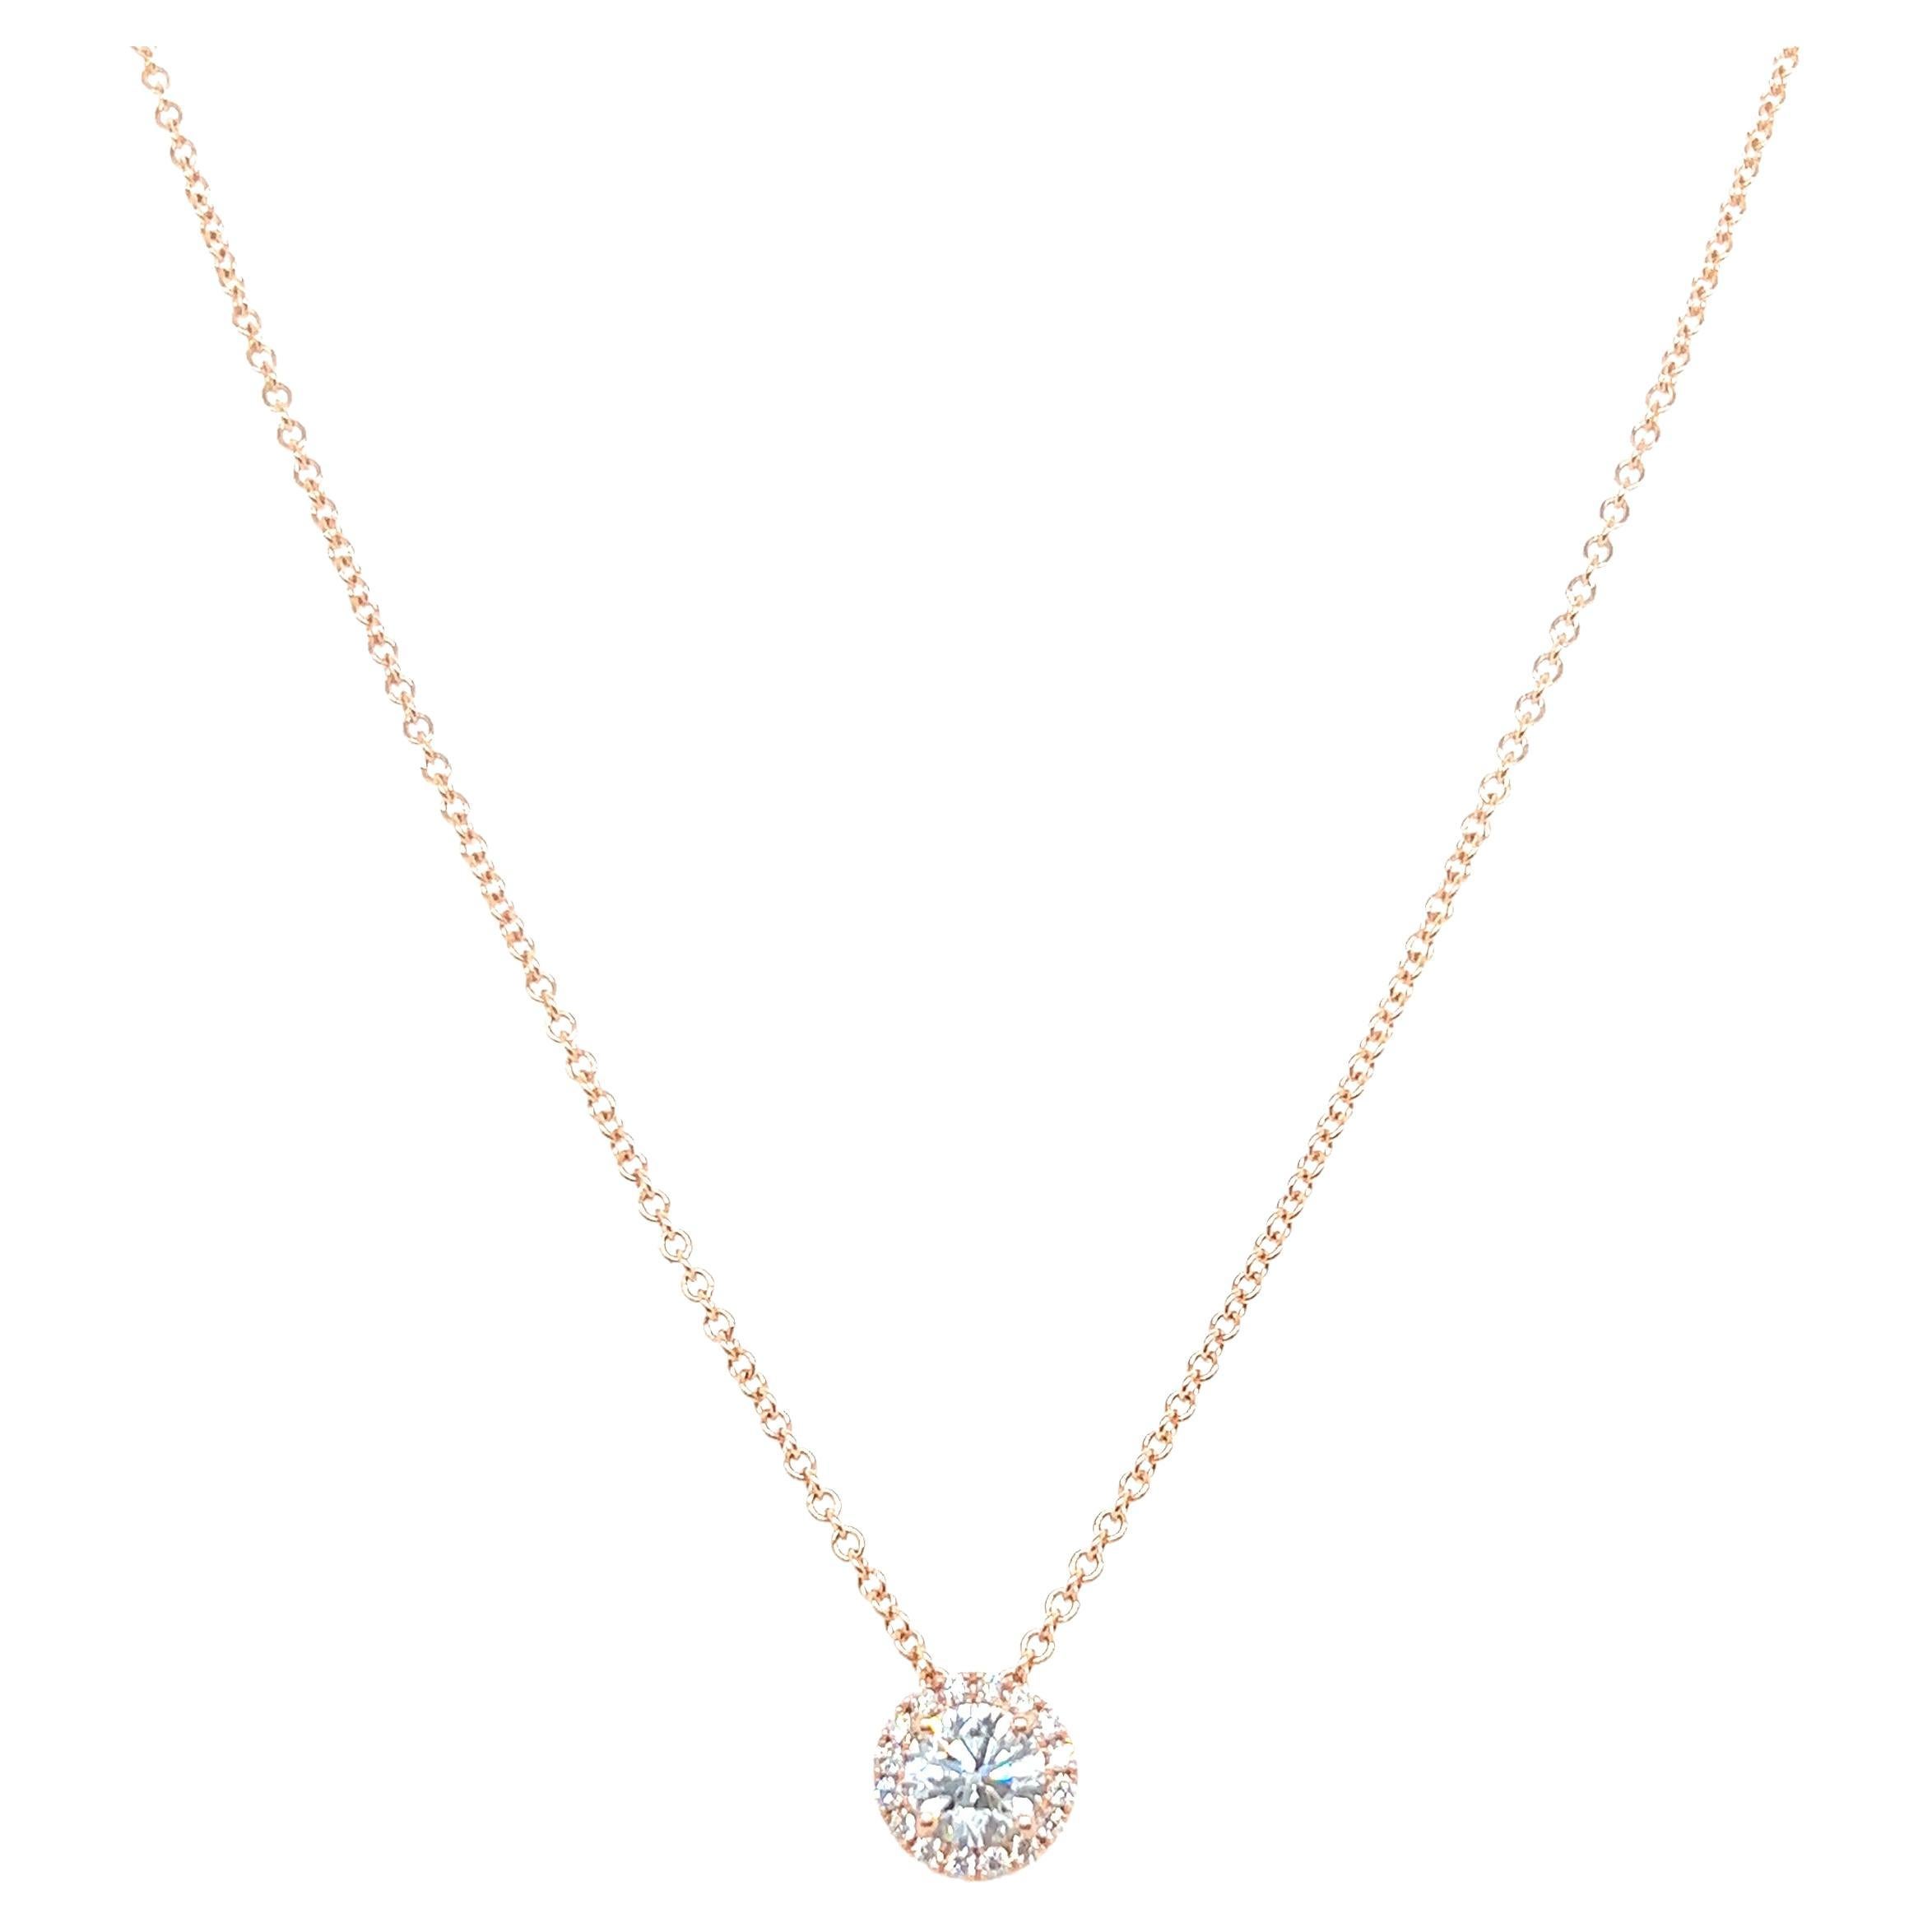 18 Inch 14k Yellow Gold 0.65 Carat Round Cut Diamond Solitaire Pendant Necklace